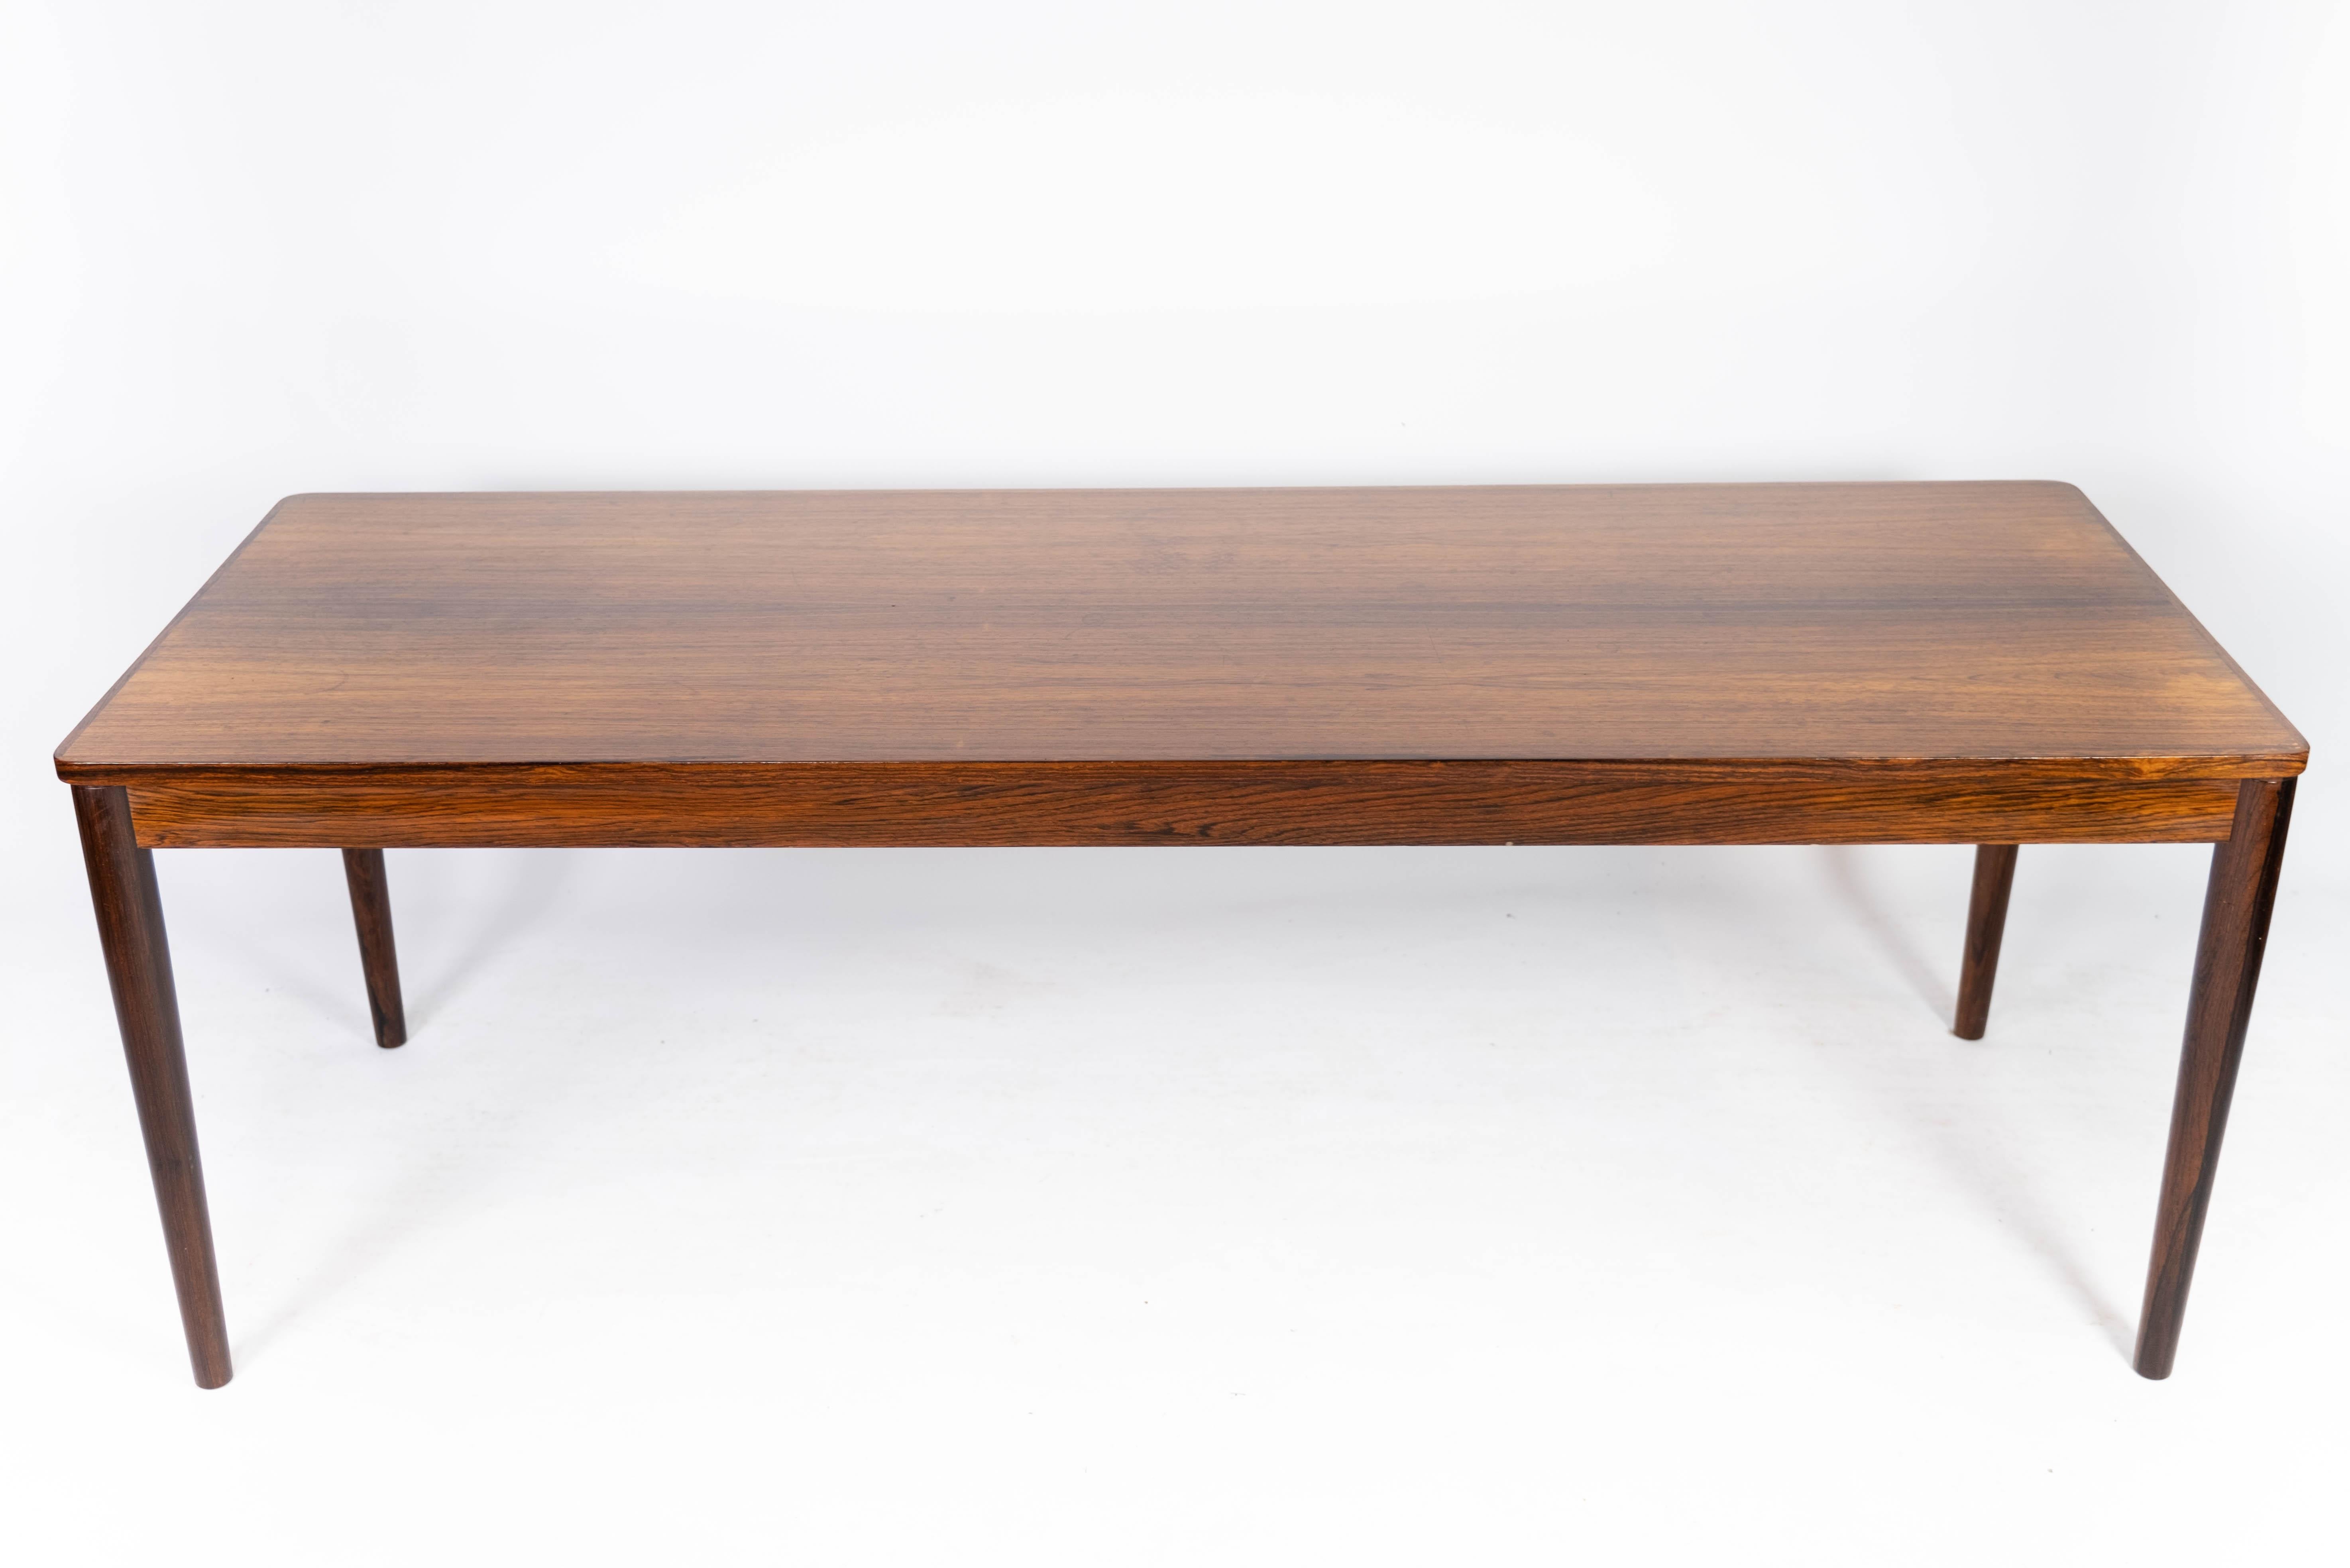 This rosewood coffee table from the 1960s exudes Danish design aesthetics at its finest. Made from rosewood, the table adds warmth and character to any room. With its simple and timeless design, it fits perfectly into both modern and classic